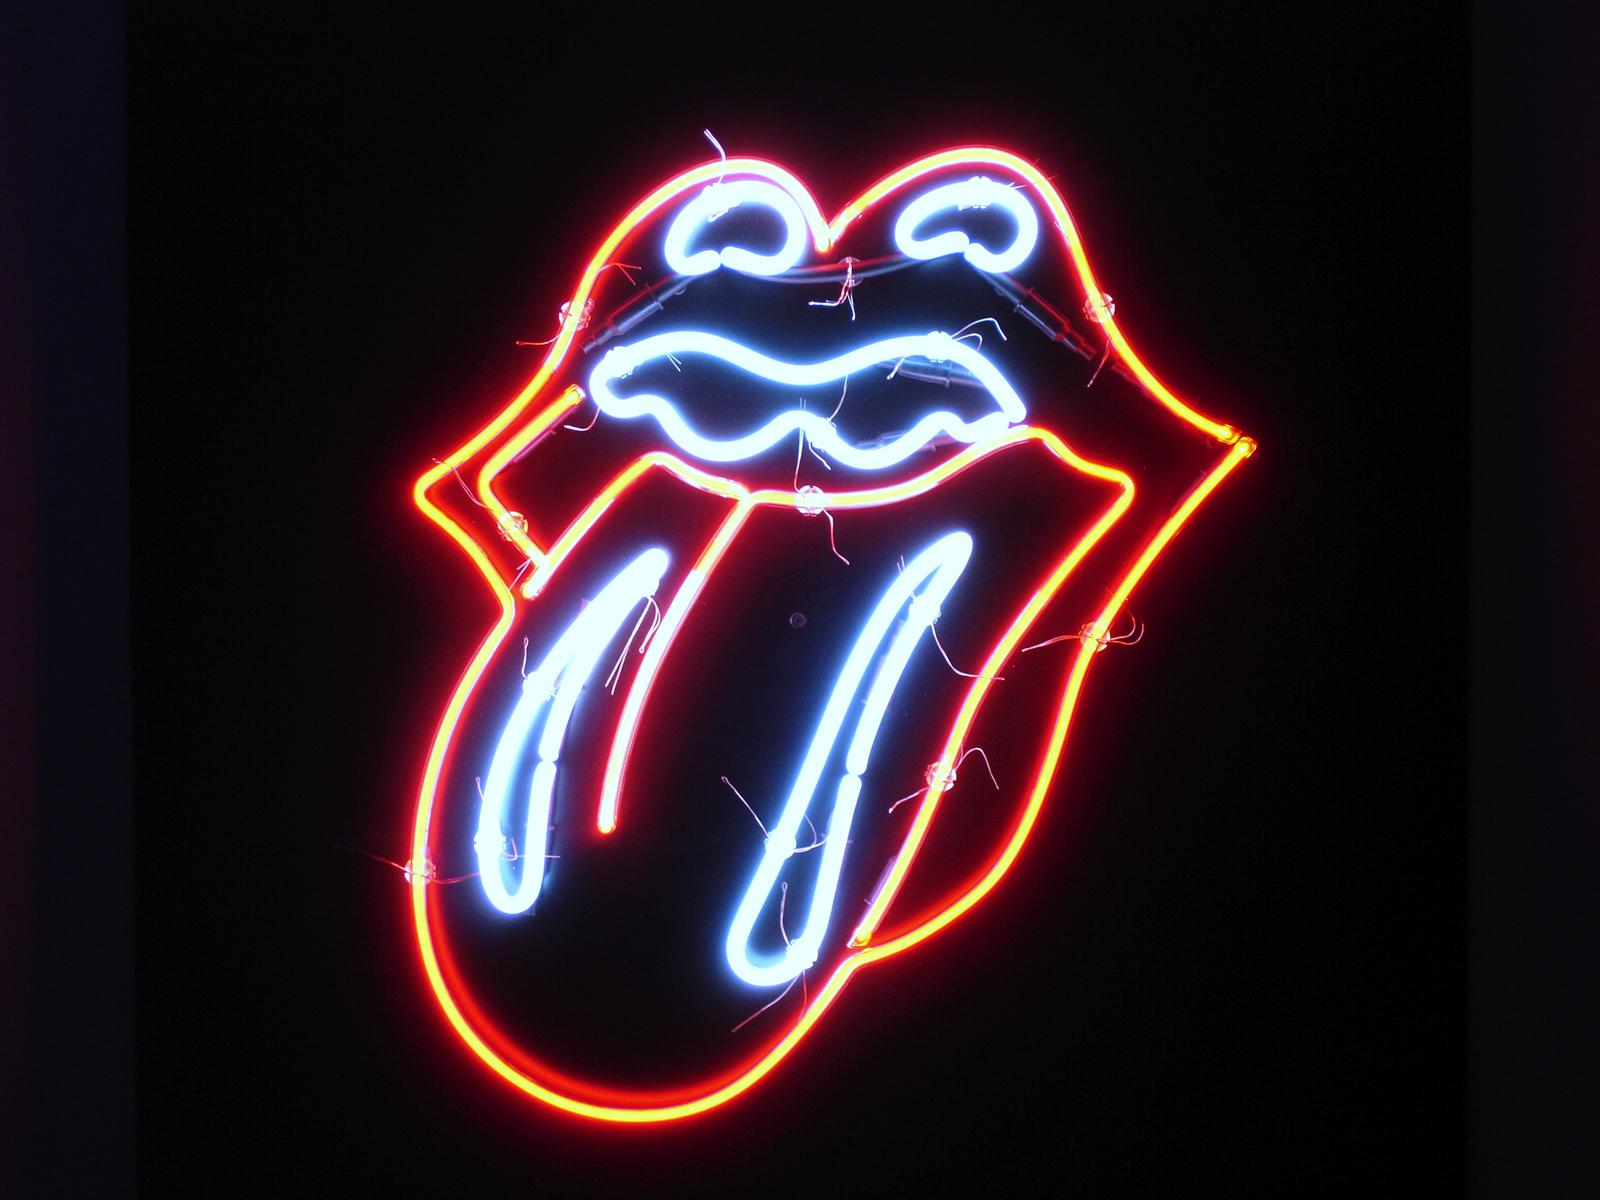 Rolling Stones lips and tongue logo by Jon Pasche